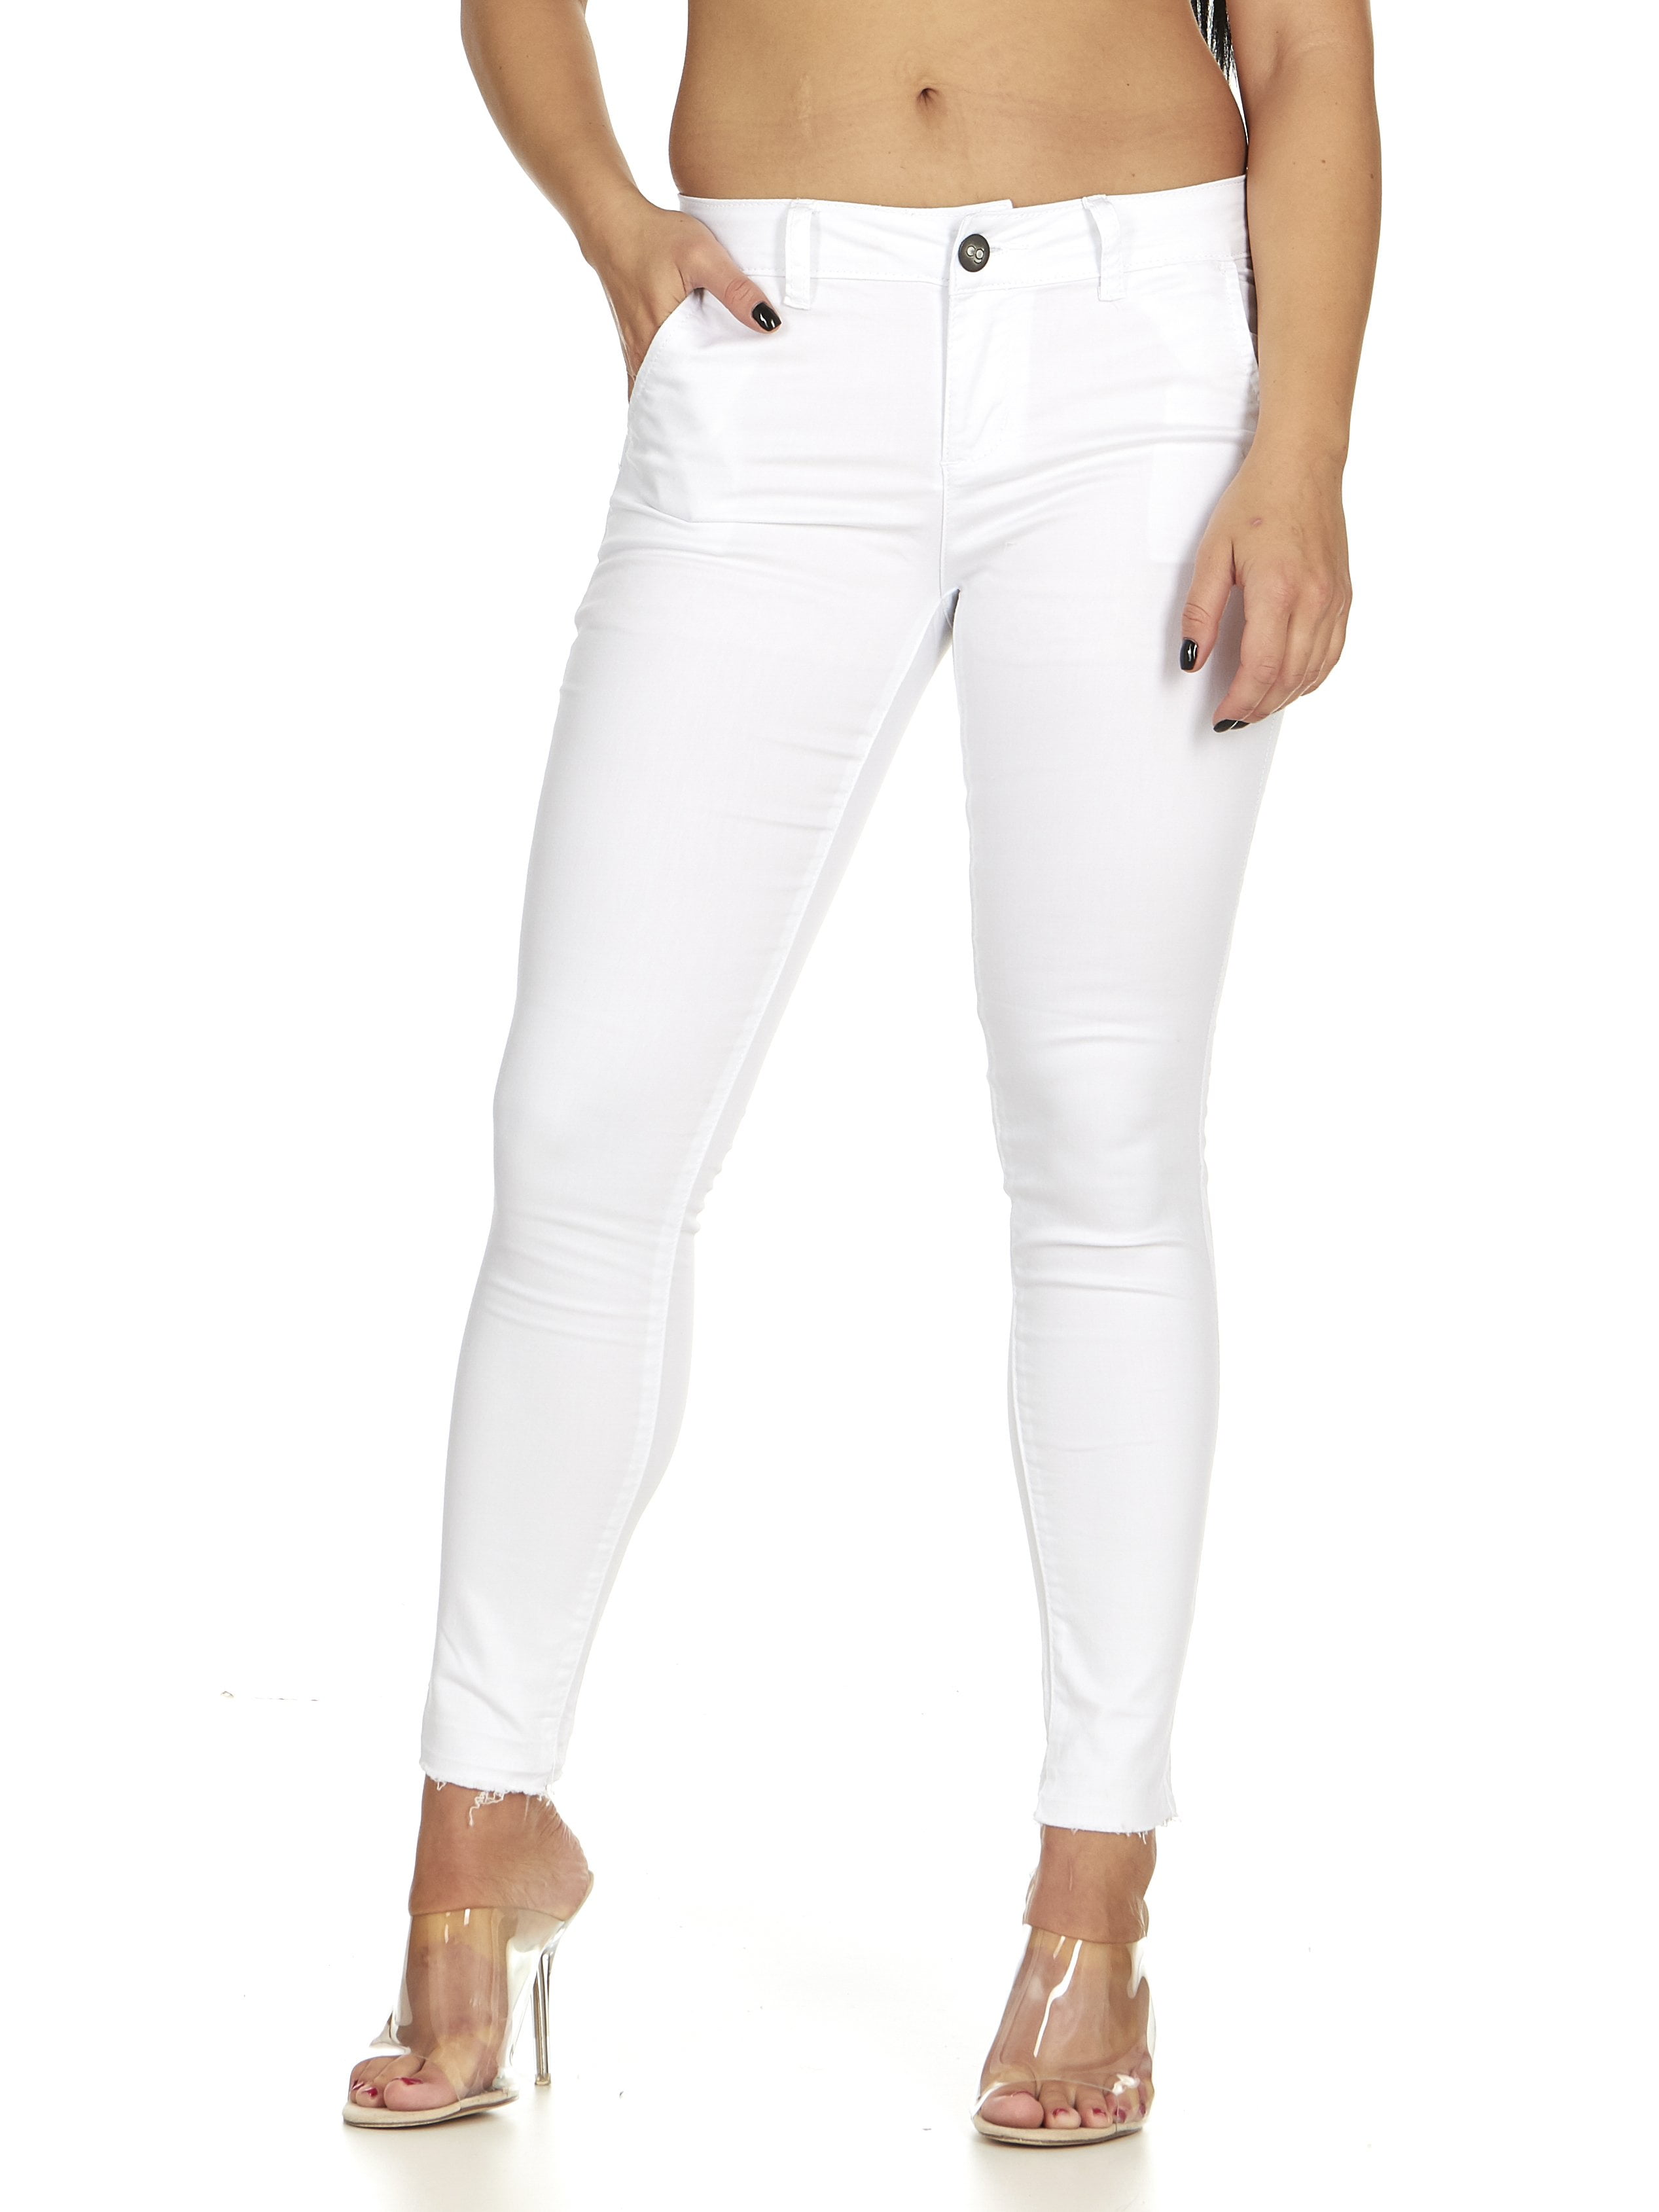 CG Jeans - Cover Girl Women's Skinny Jeans Trouser Pant Style Side ...